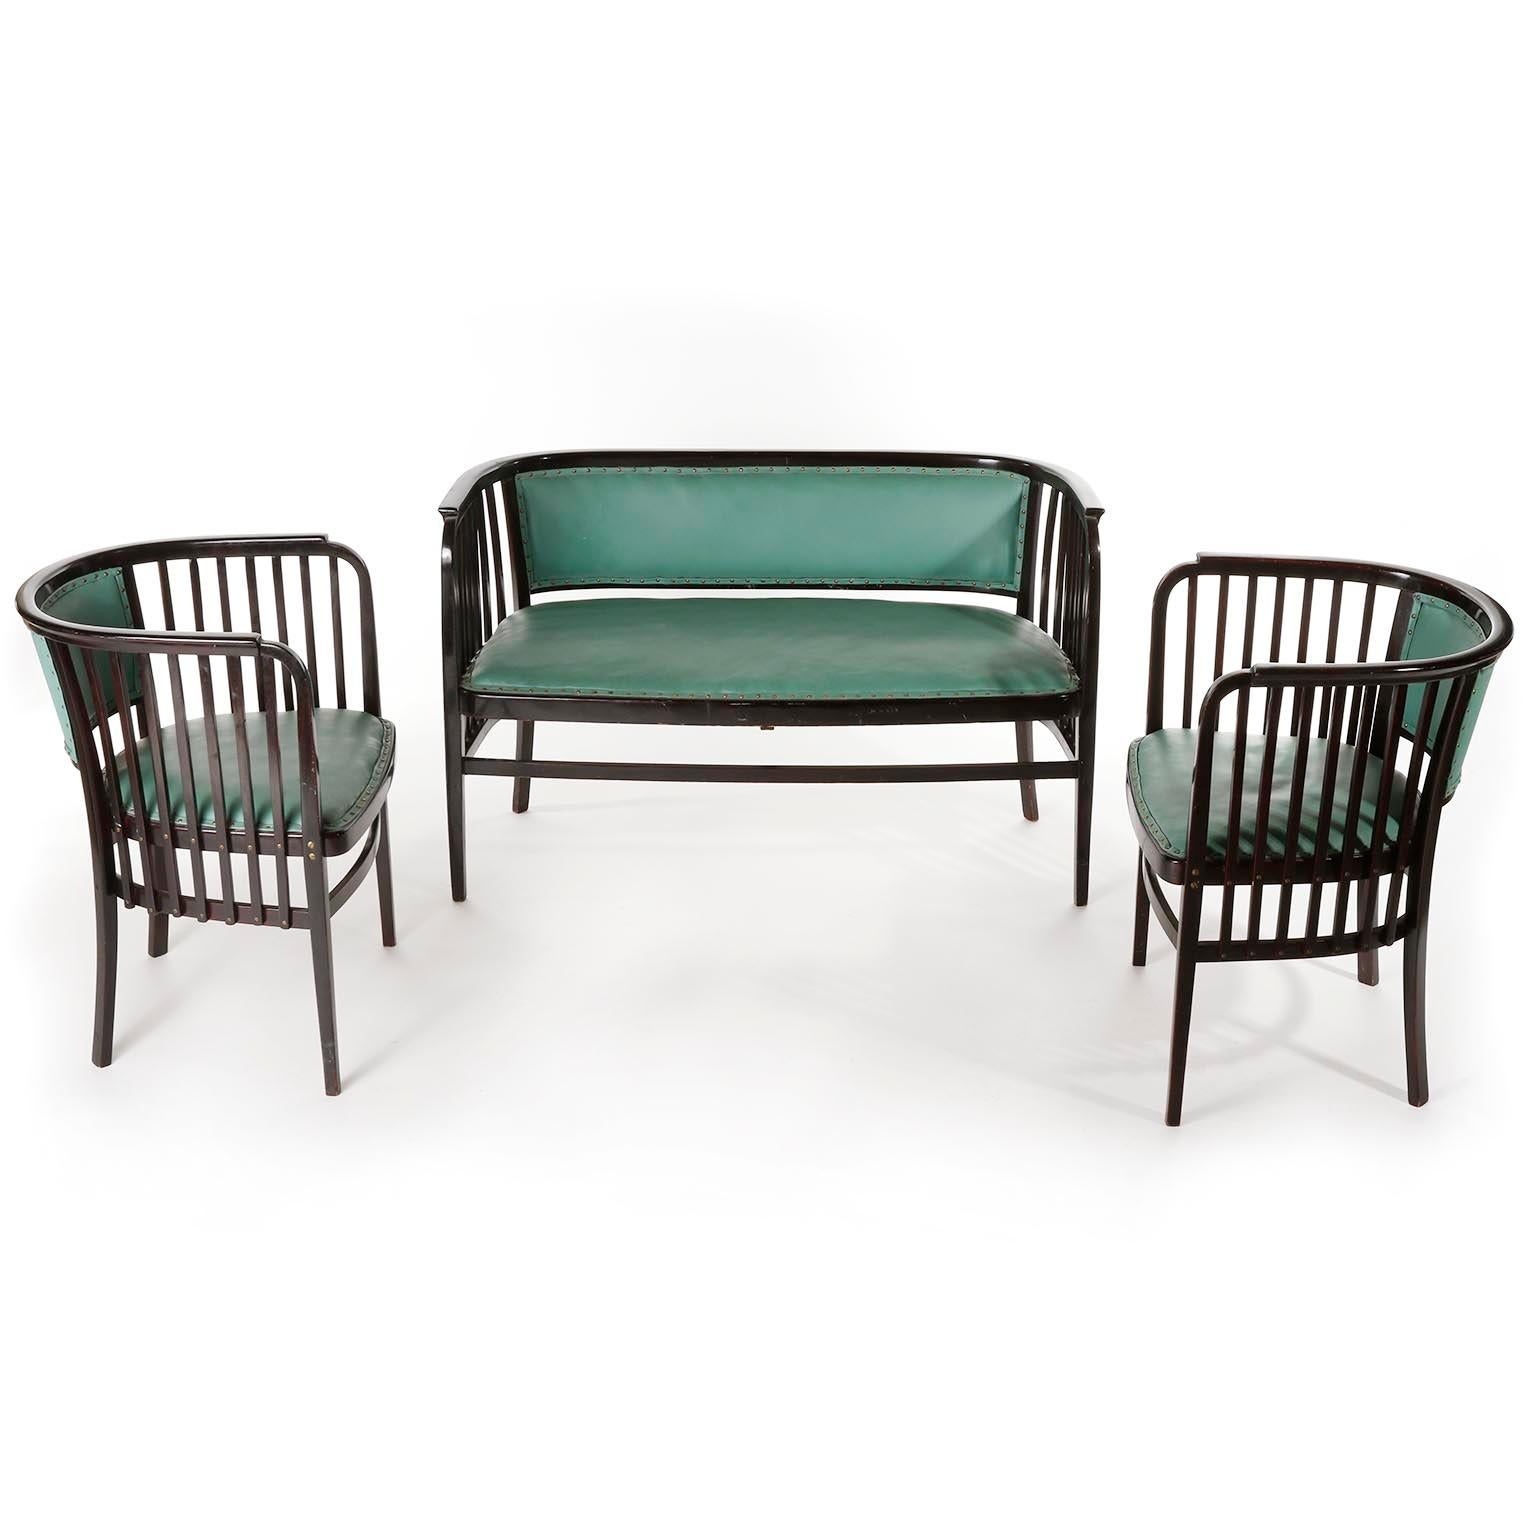 Pair of Armchairs Chairs Marcel Kammerer, Thonet, Turquoise Green Leather, 1910 In Good Condition For Sale In Hausmannstätten, AT